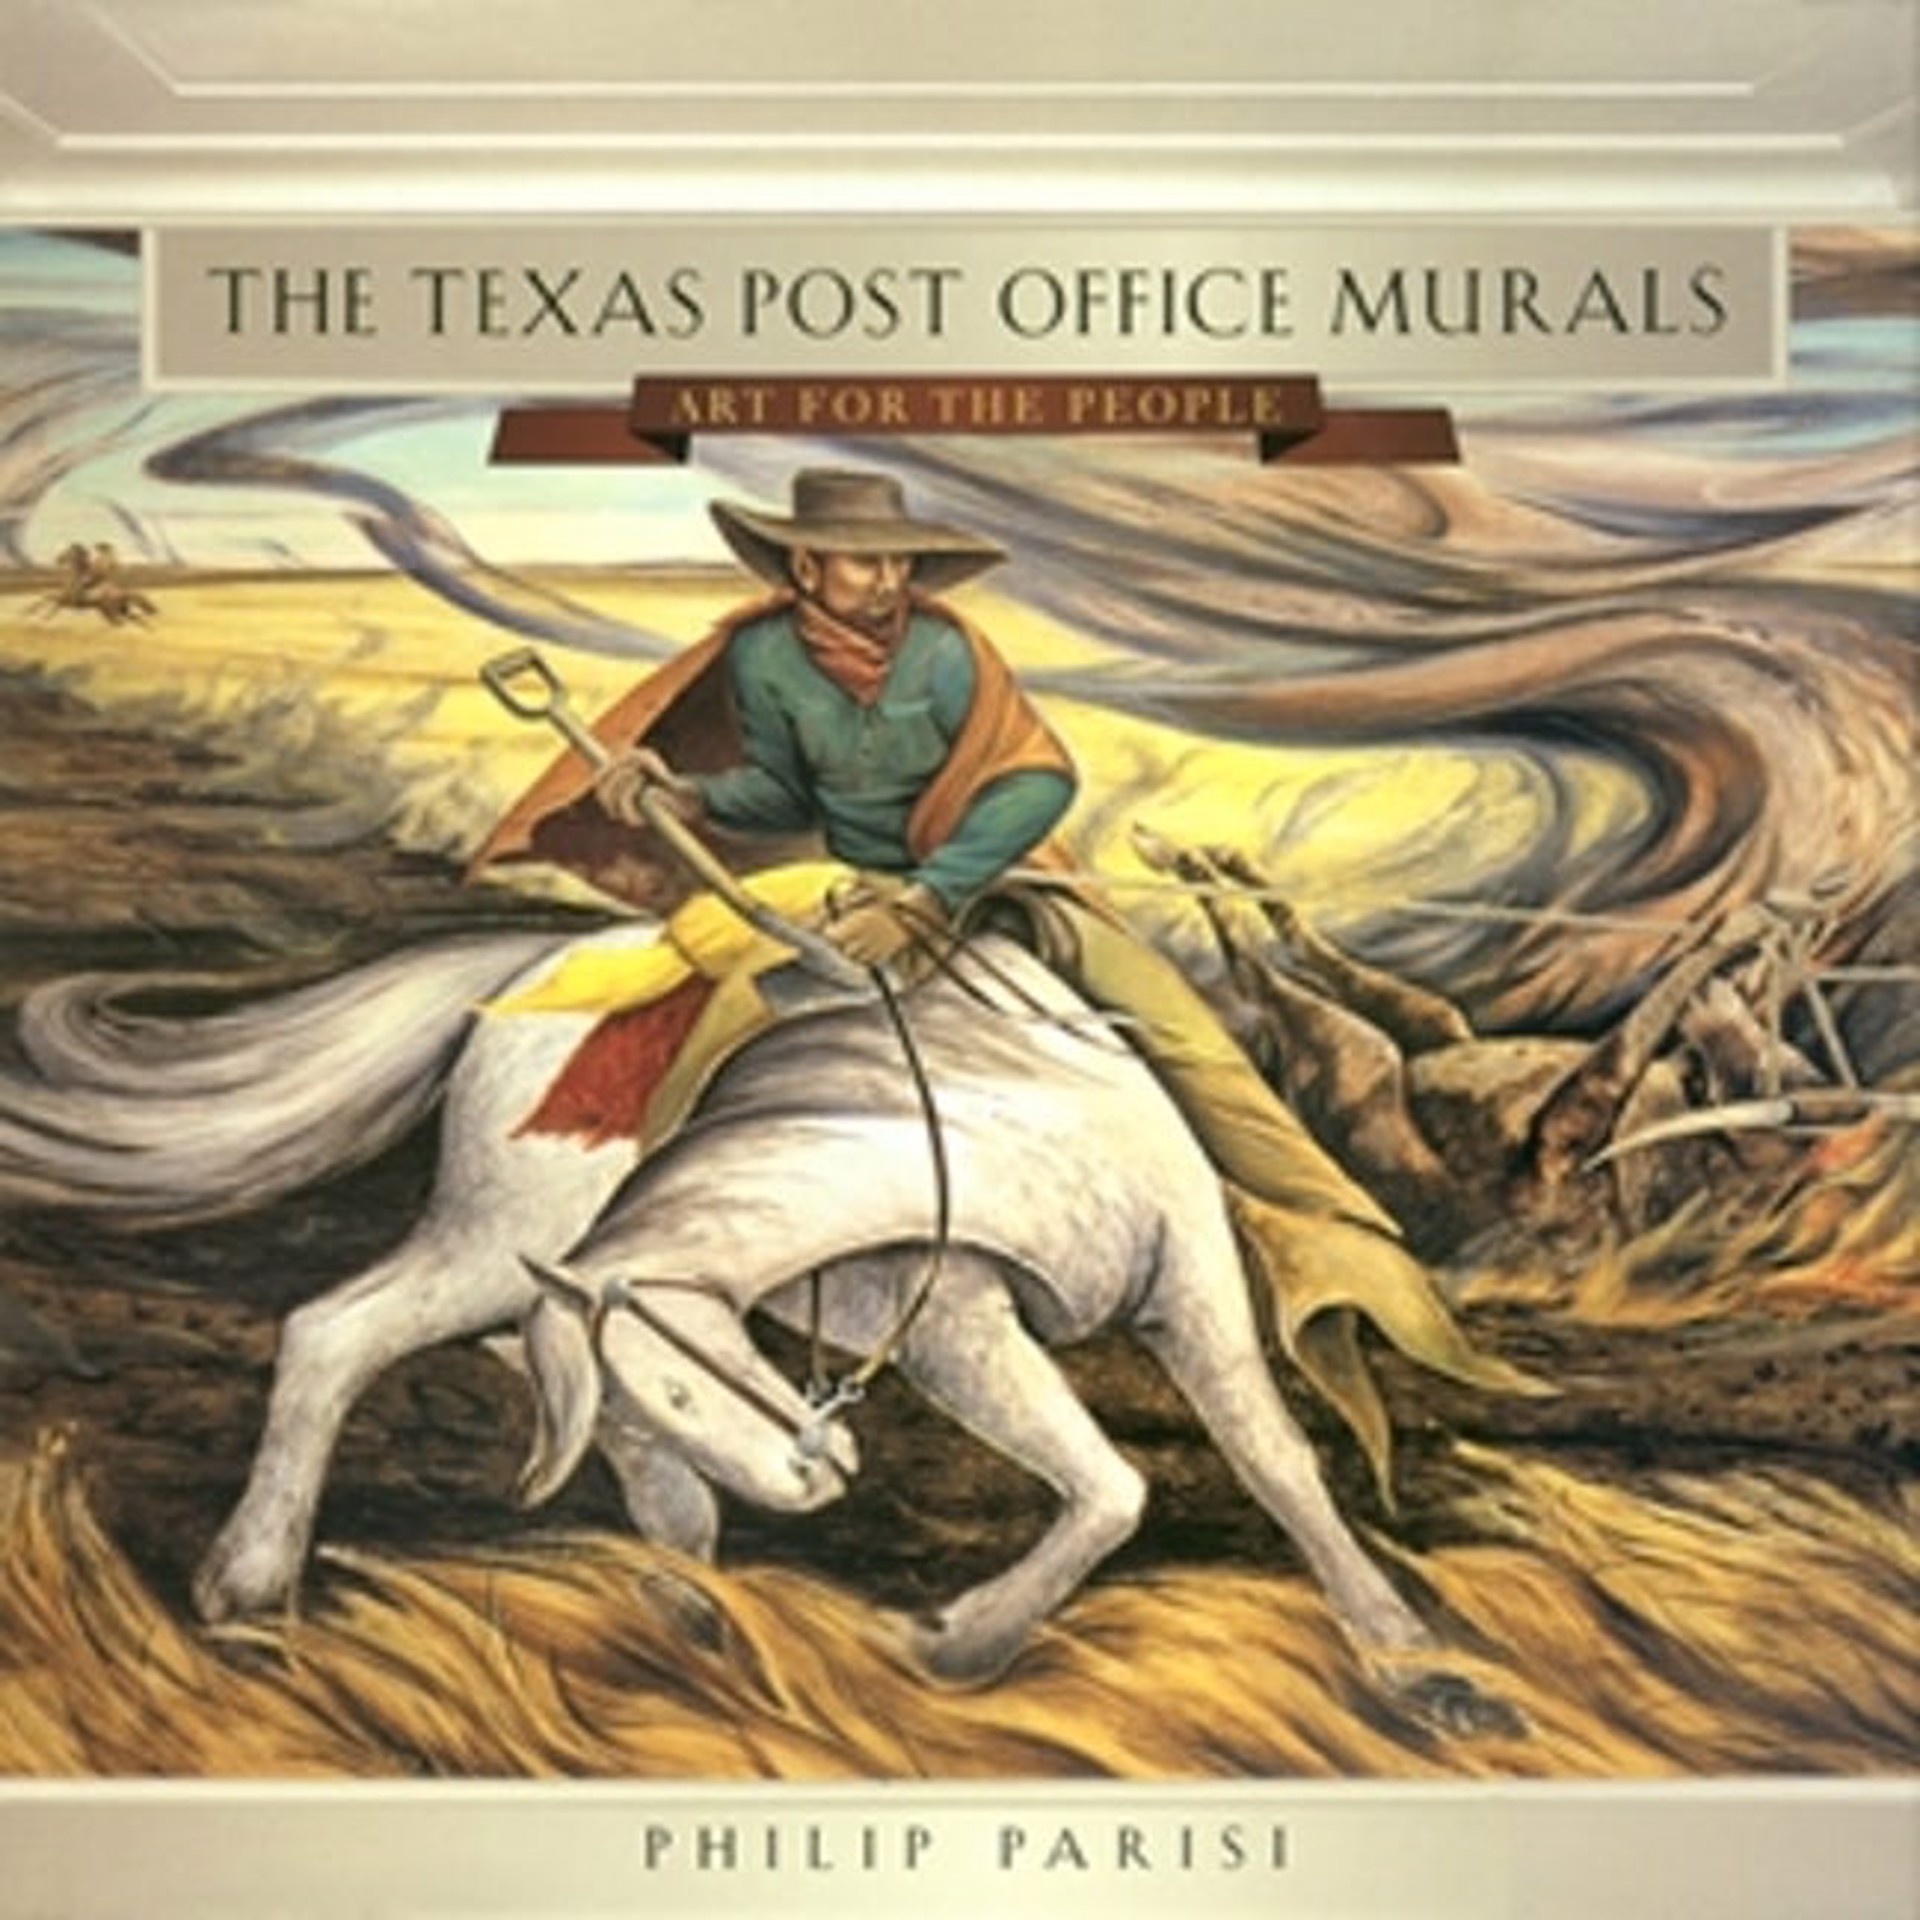 The Texas Post Office Murals: Art for the People by Publications